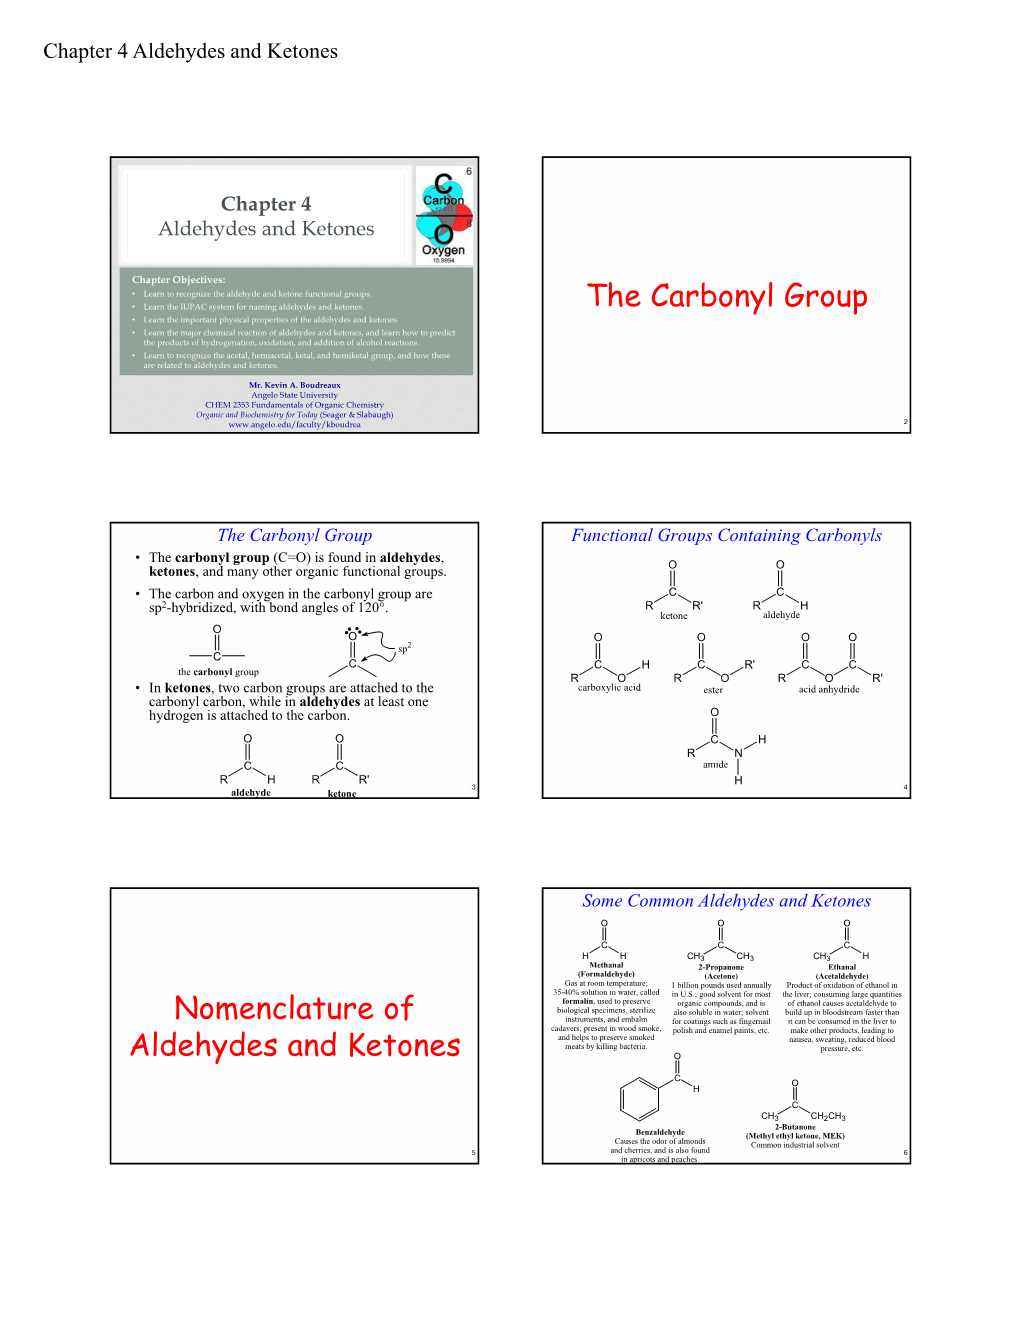 The Carbonyl Group Nomenclature of Aldehydes and Ketones